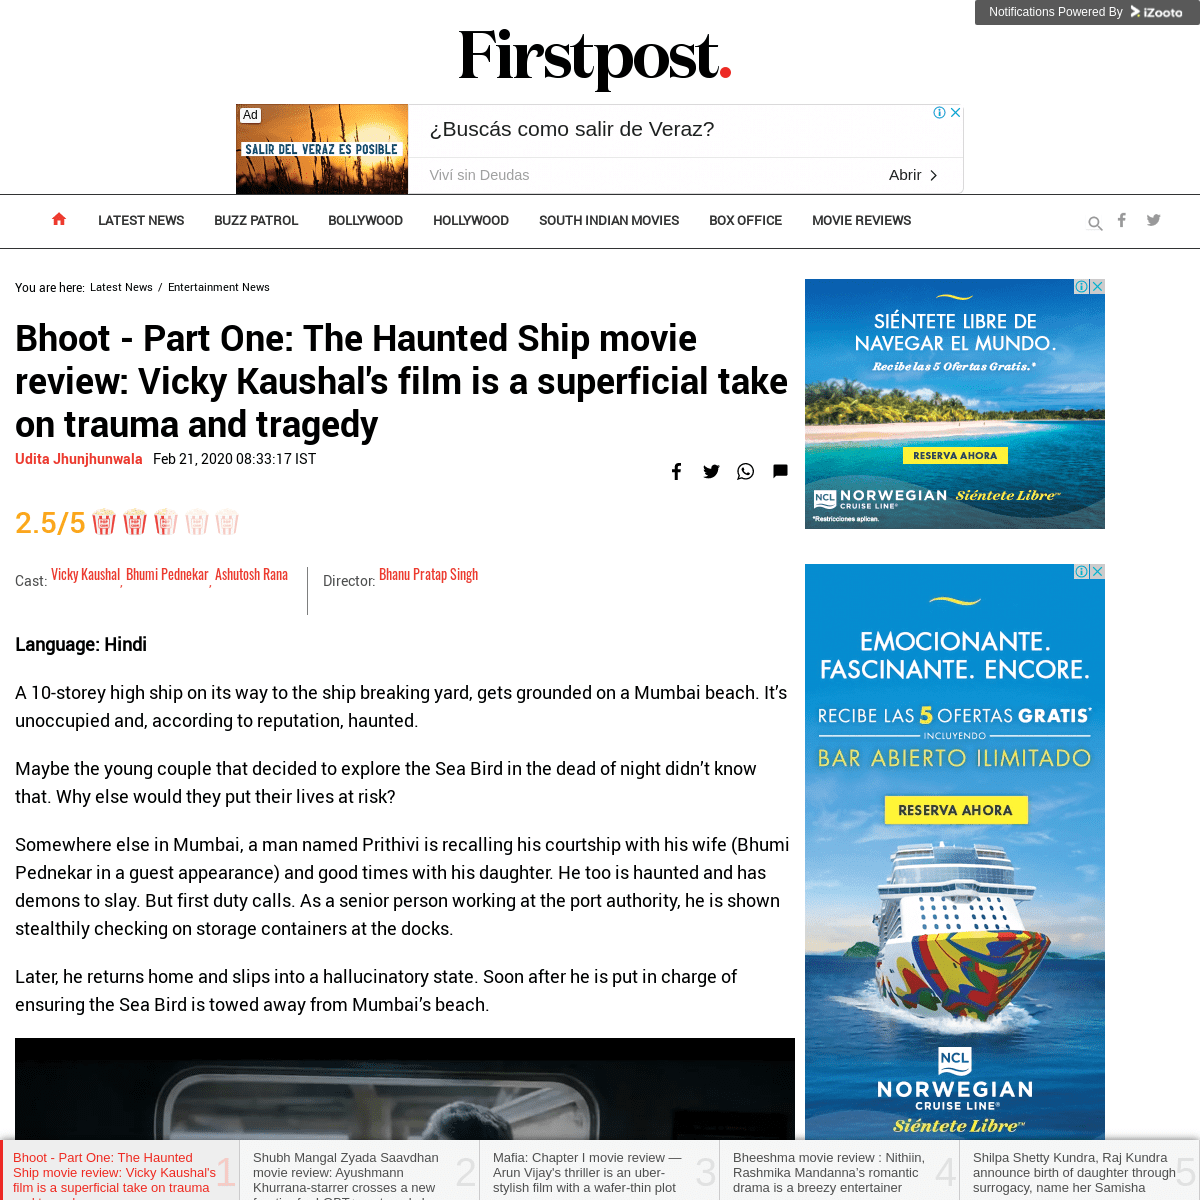 A complete backup of www.firstpost.com/entertainment/bhoot-part-one-the-haunted-ship-movie-review-vicky-kaushals-film-is-a-super